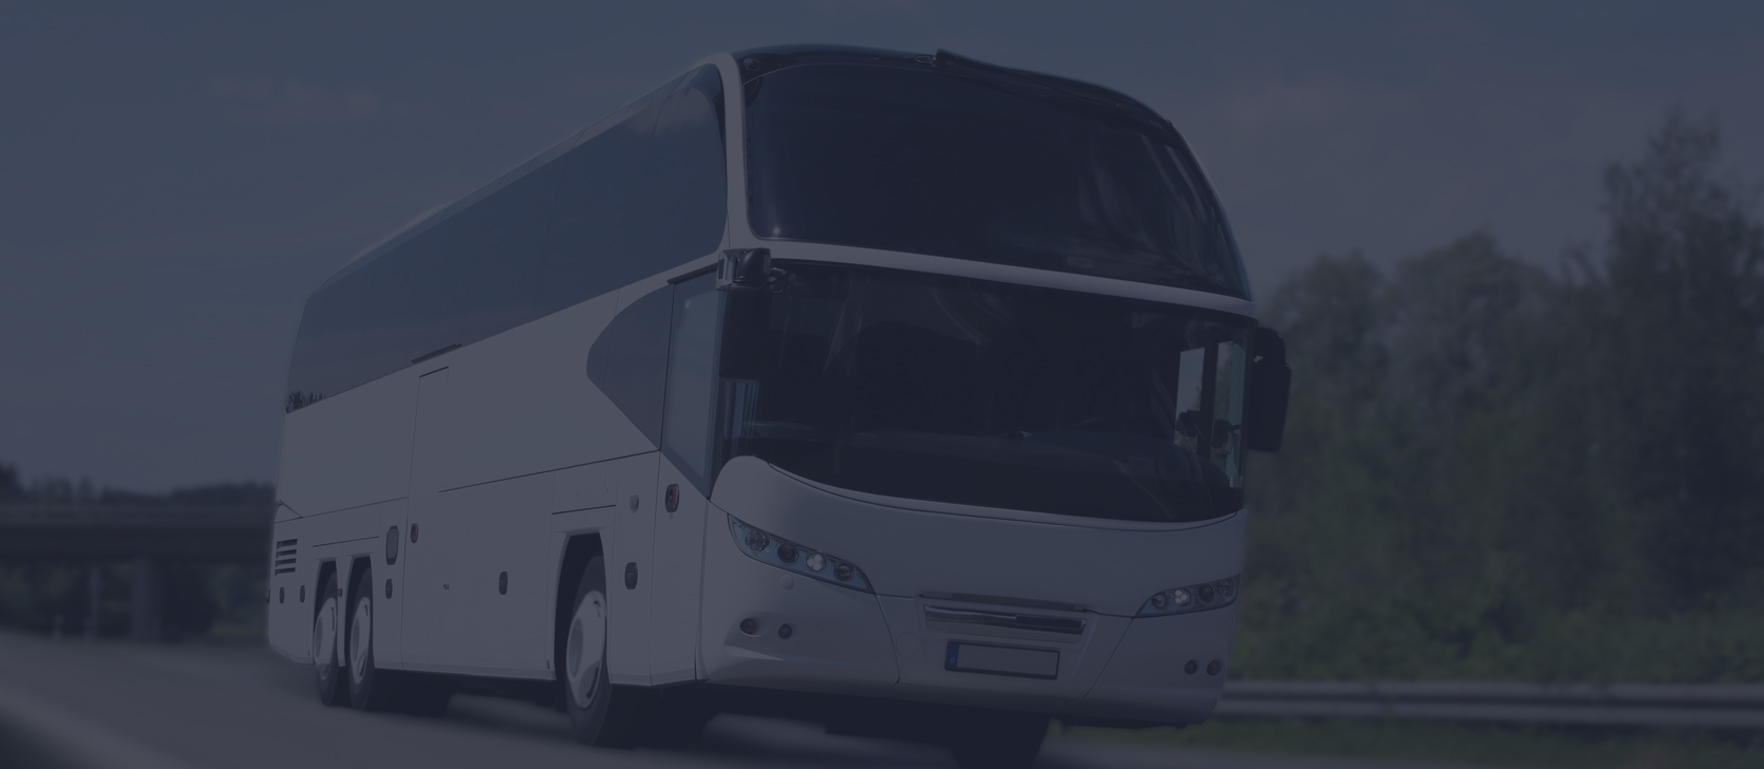 Minibus Hire Service in Middlesbrough